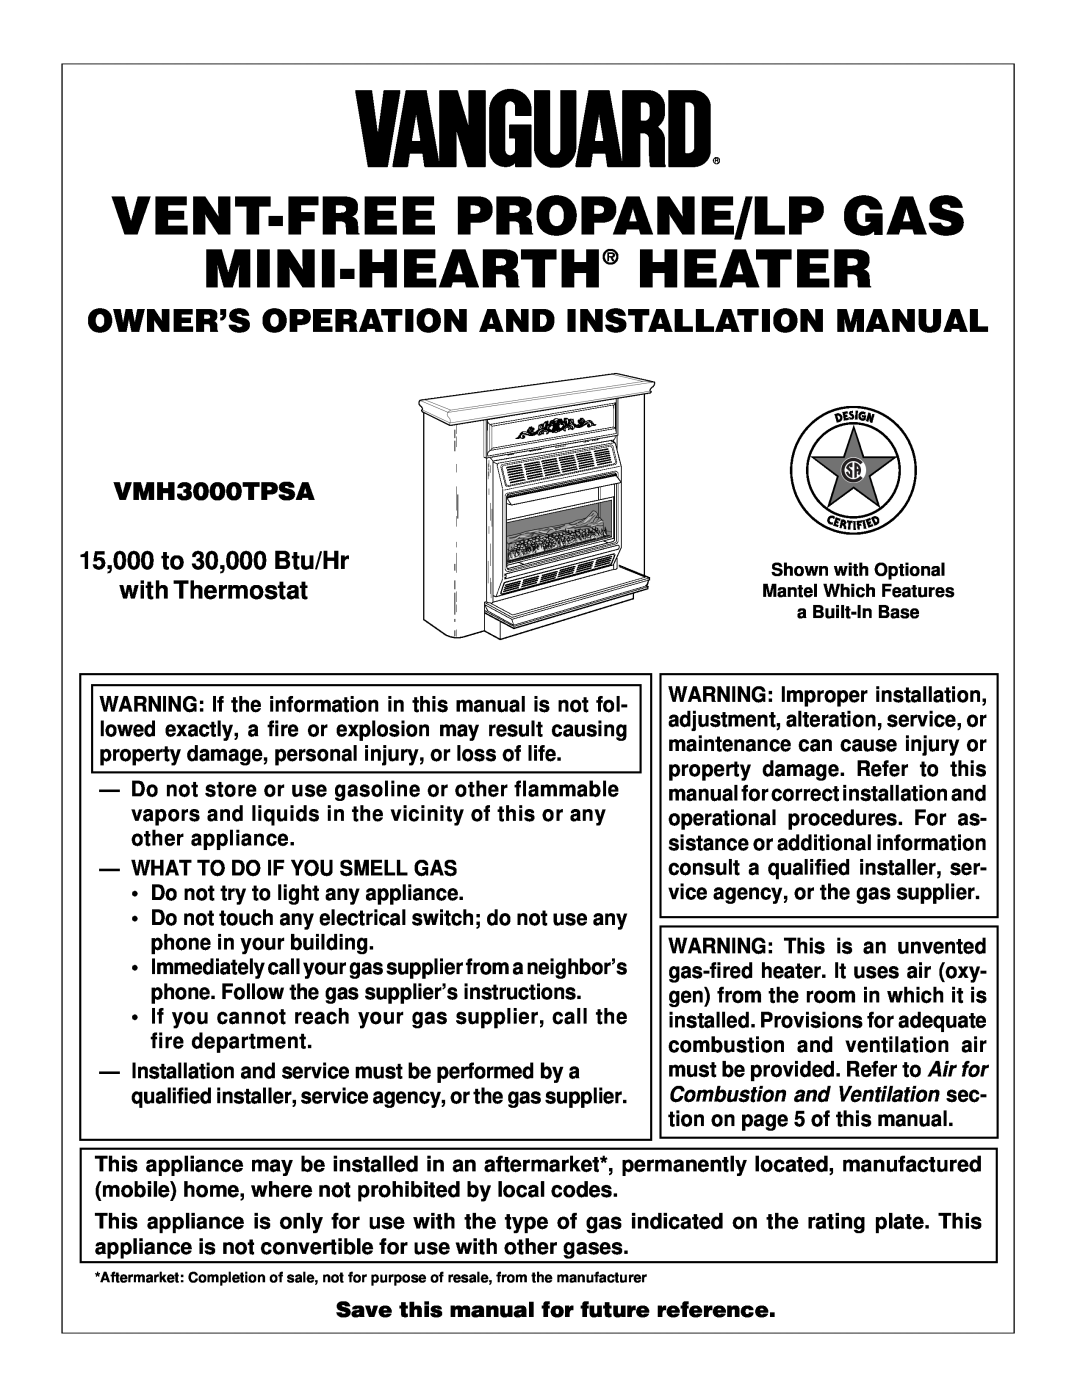 Vanguard Heating VMH3000TPSA installation manual Owner’S Operation And Installation Manual, What To Do If You Smell Gas 